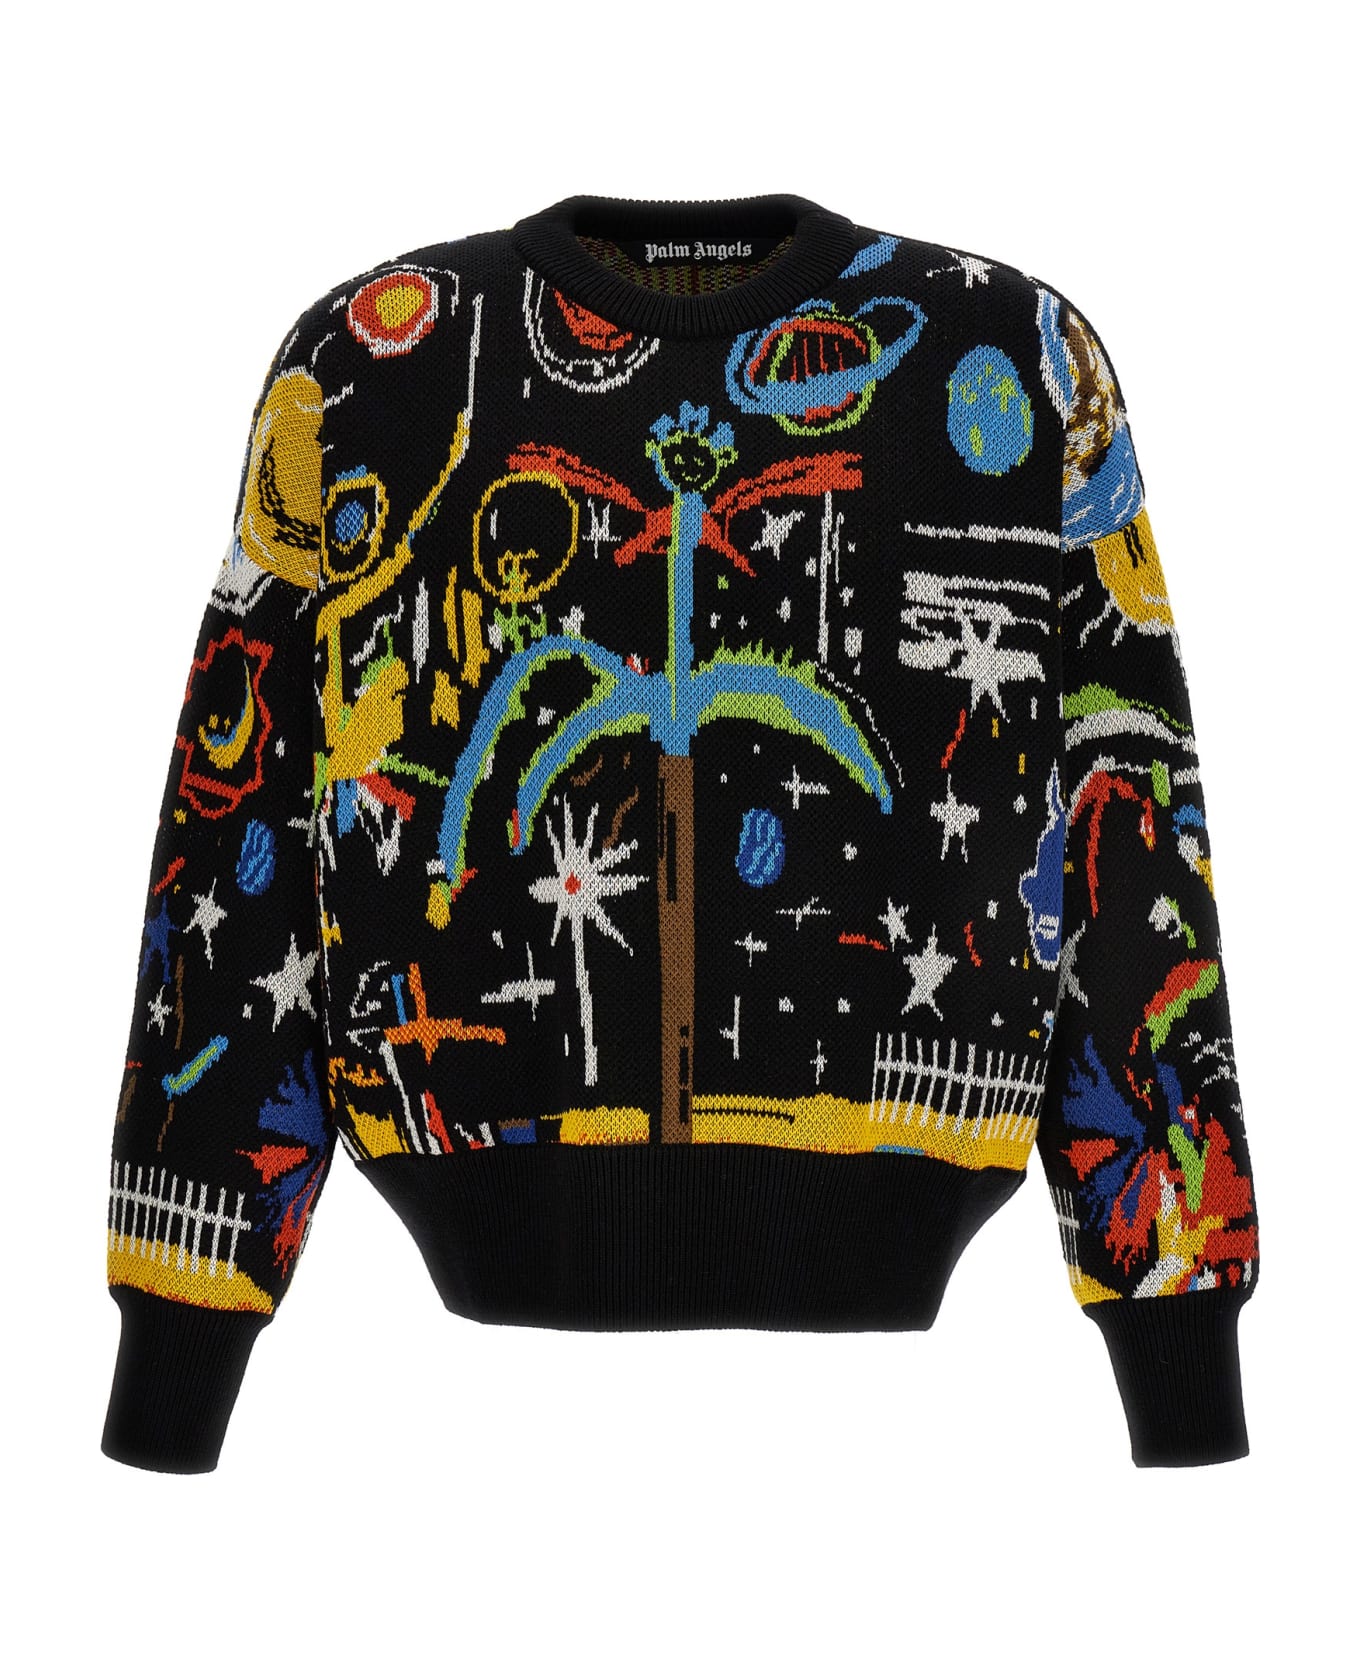 Palm Angels Starry Night Sweater - Multicolor